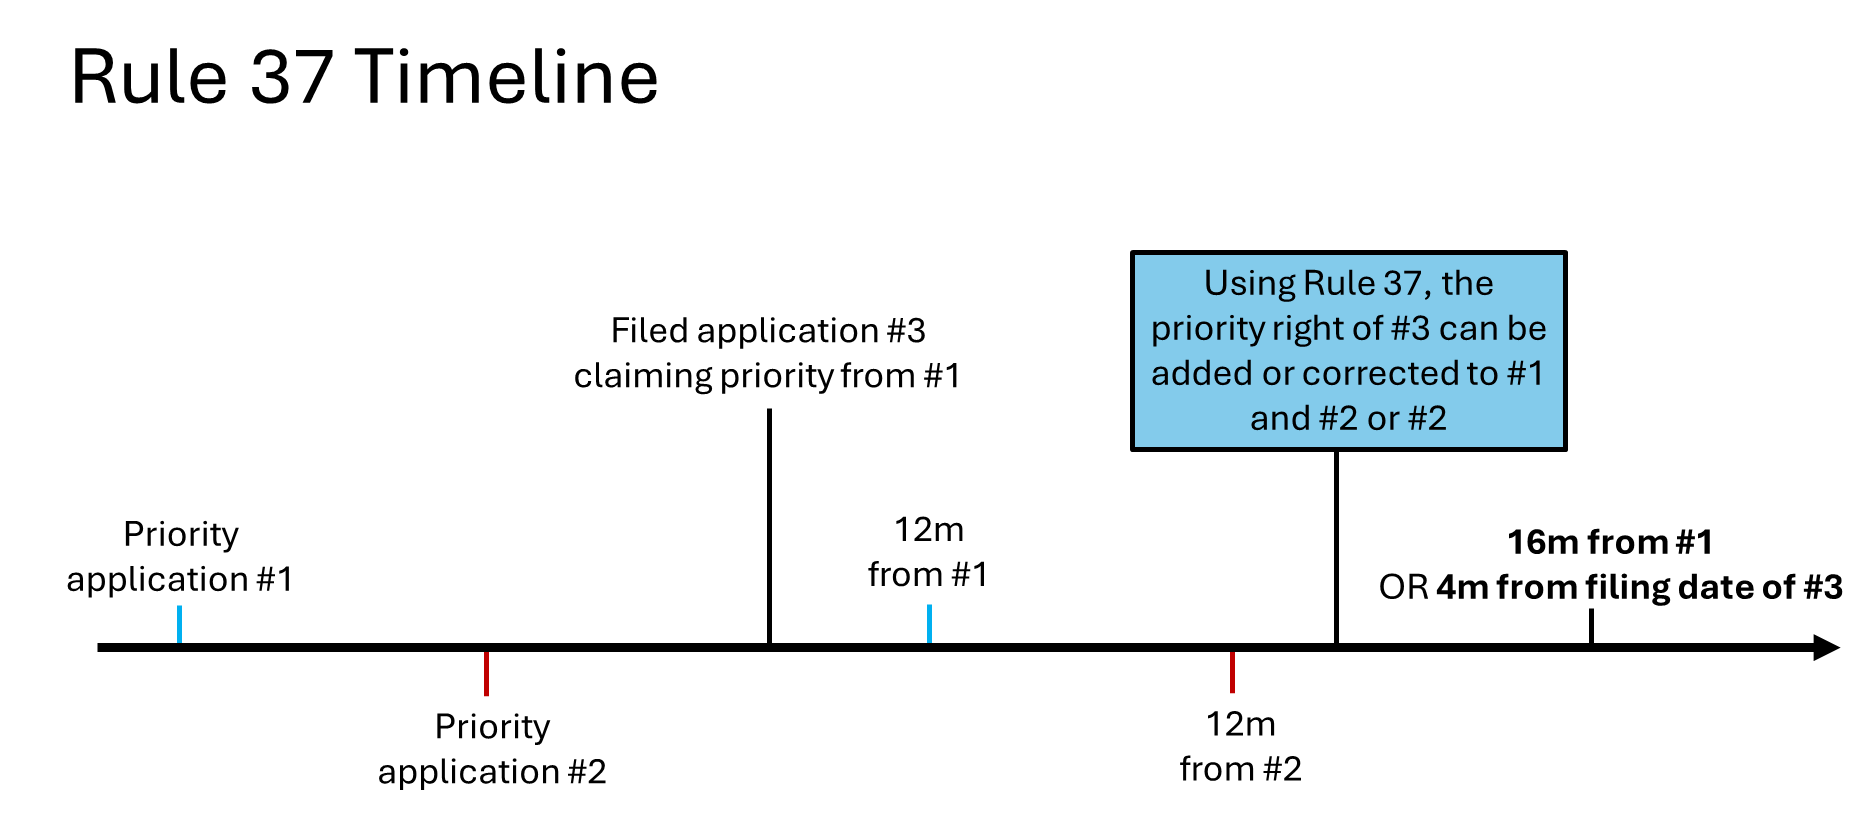 A black background with blue and red lines

Description automatically generated